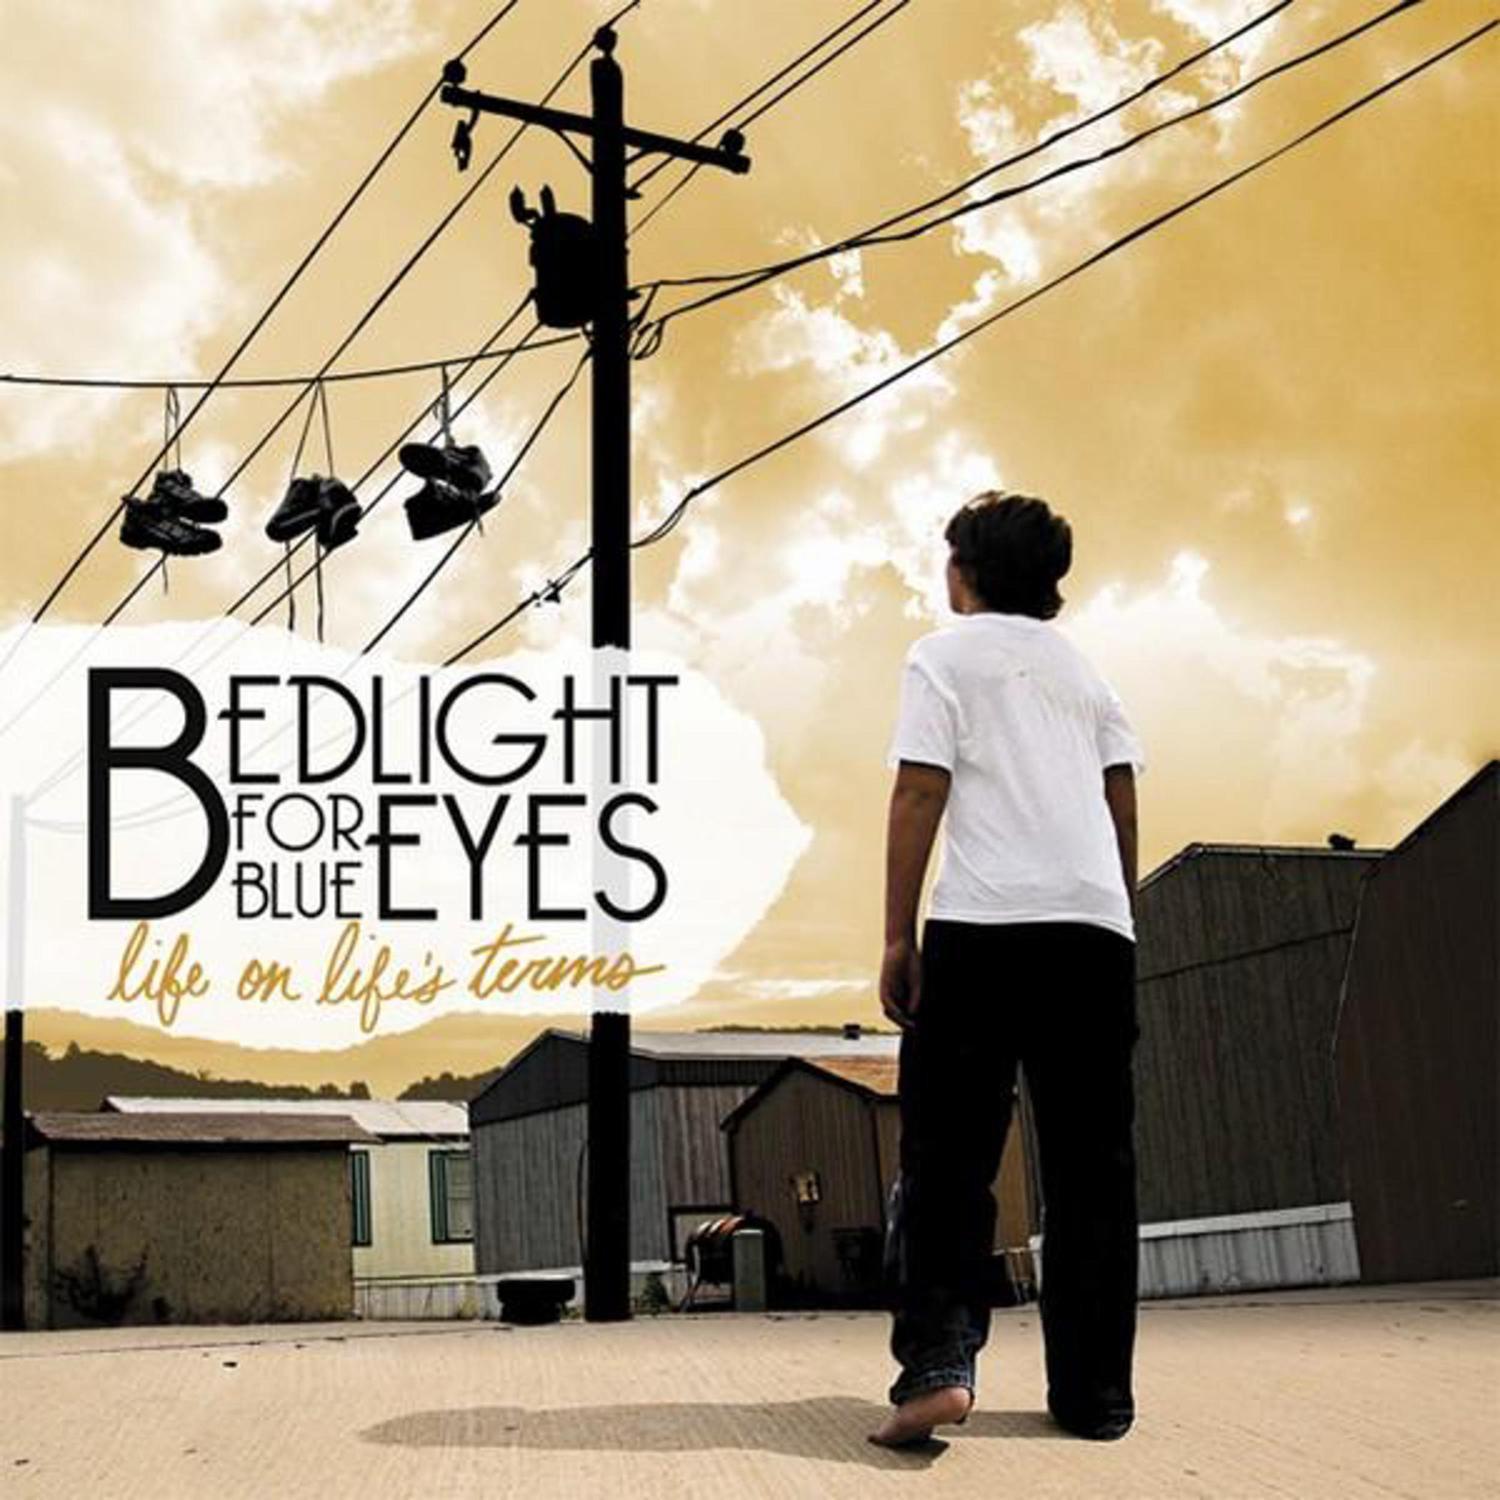 Bedlight for Blue Eyes - Meant to Be